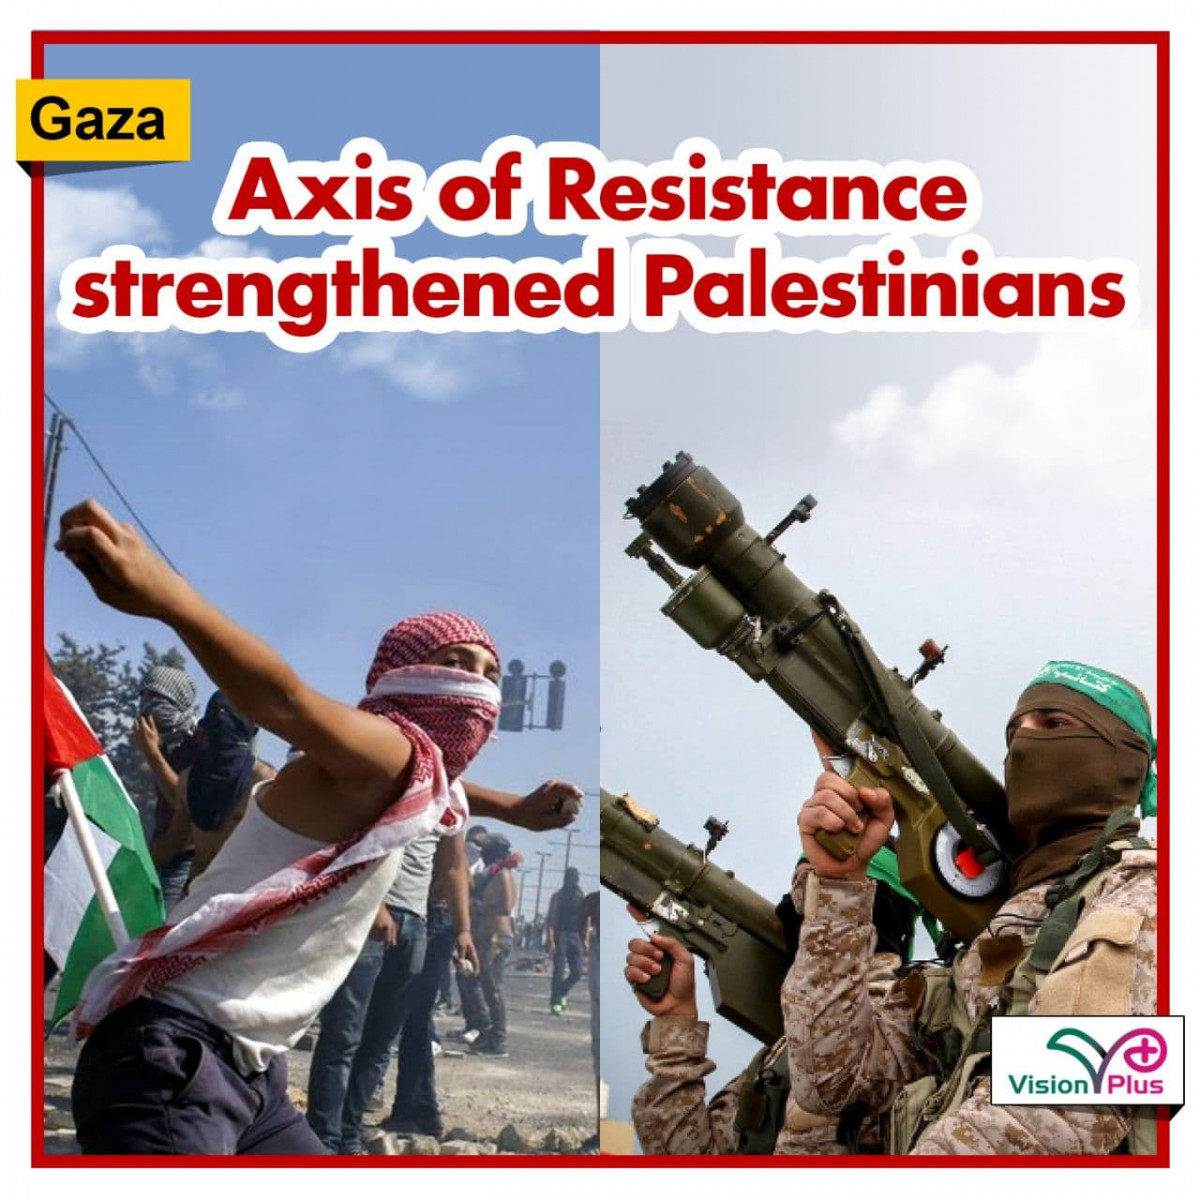 Axis of Resistance strengthened Palestinians